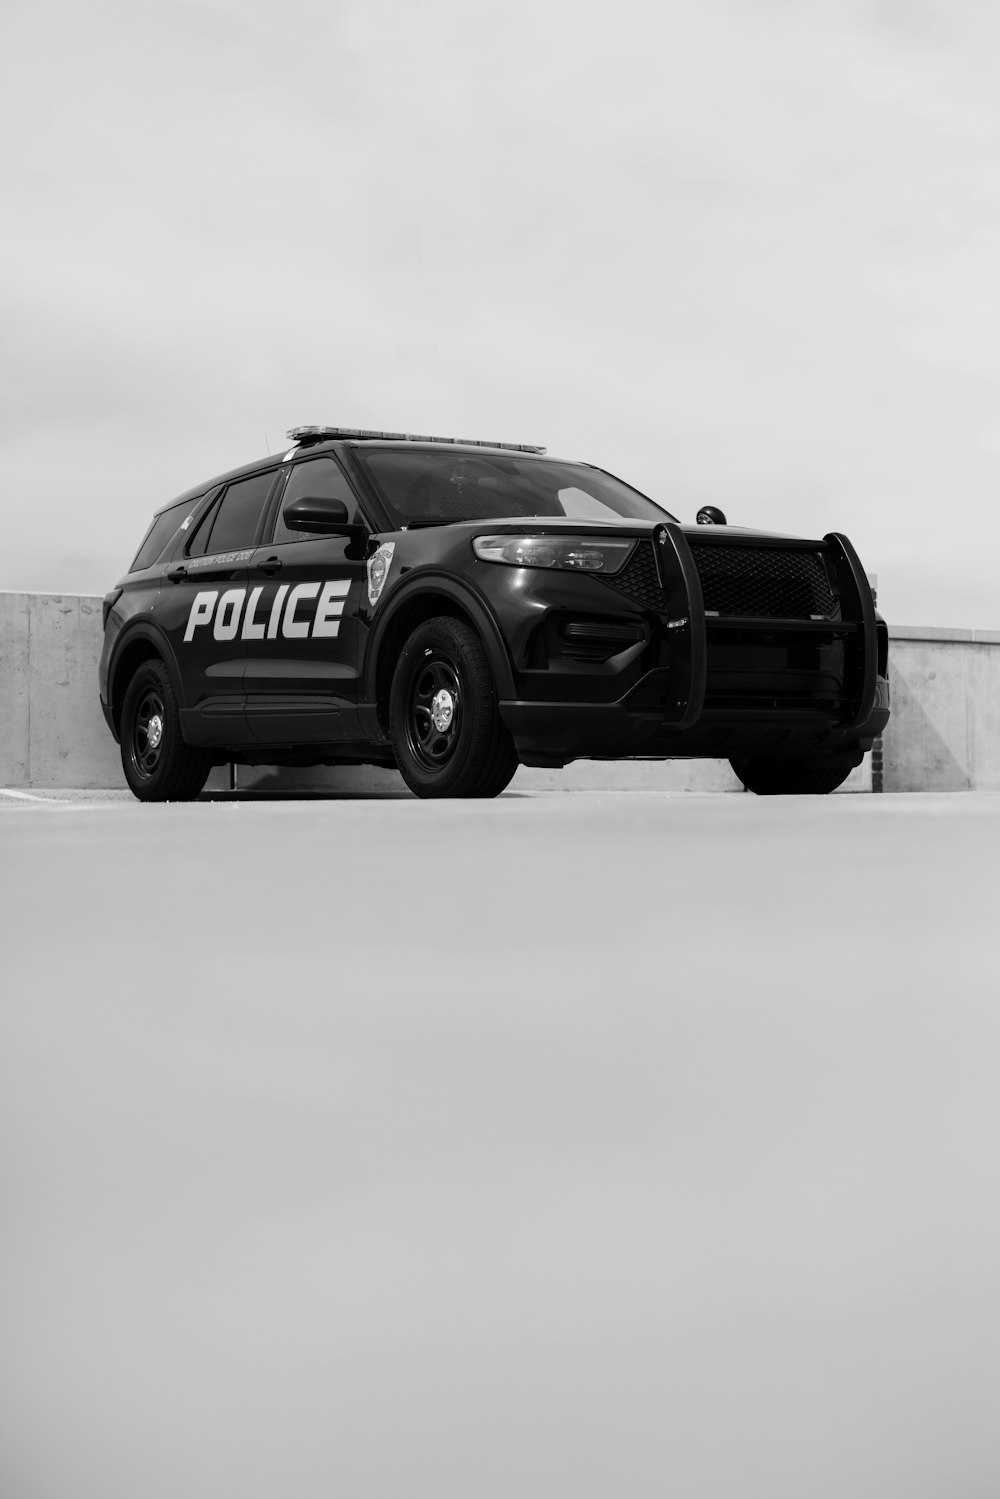 a police car parked on the side of the road